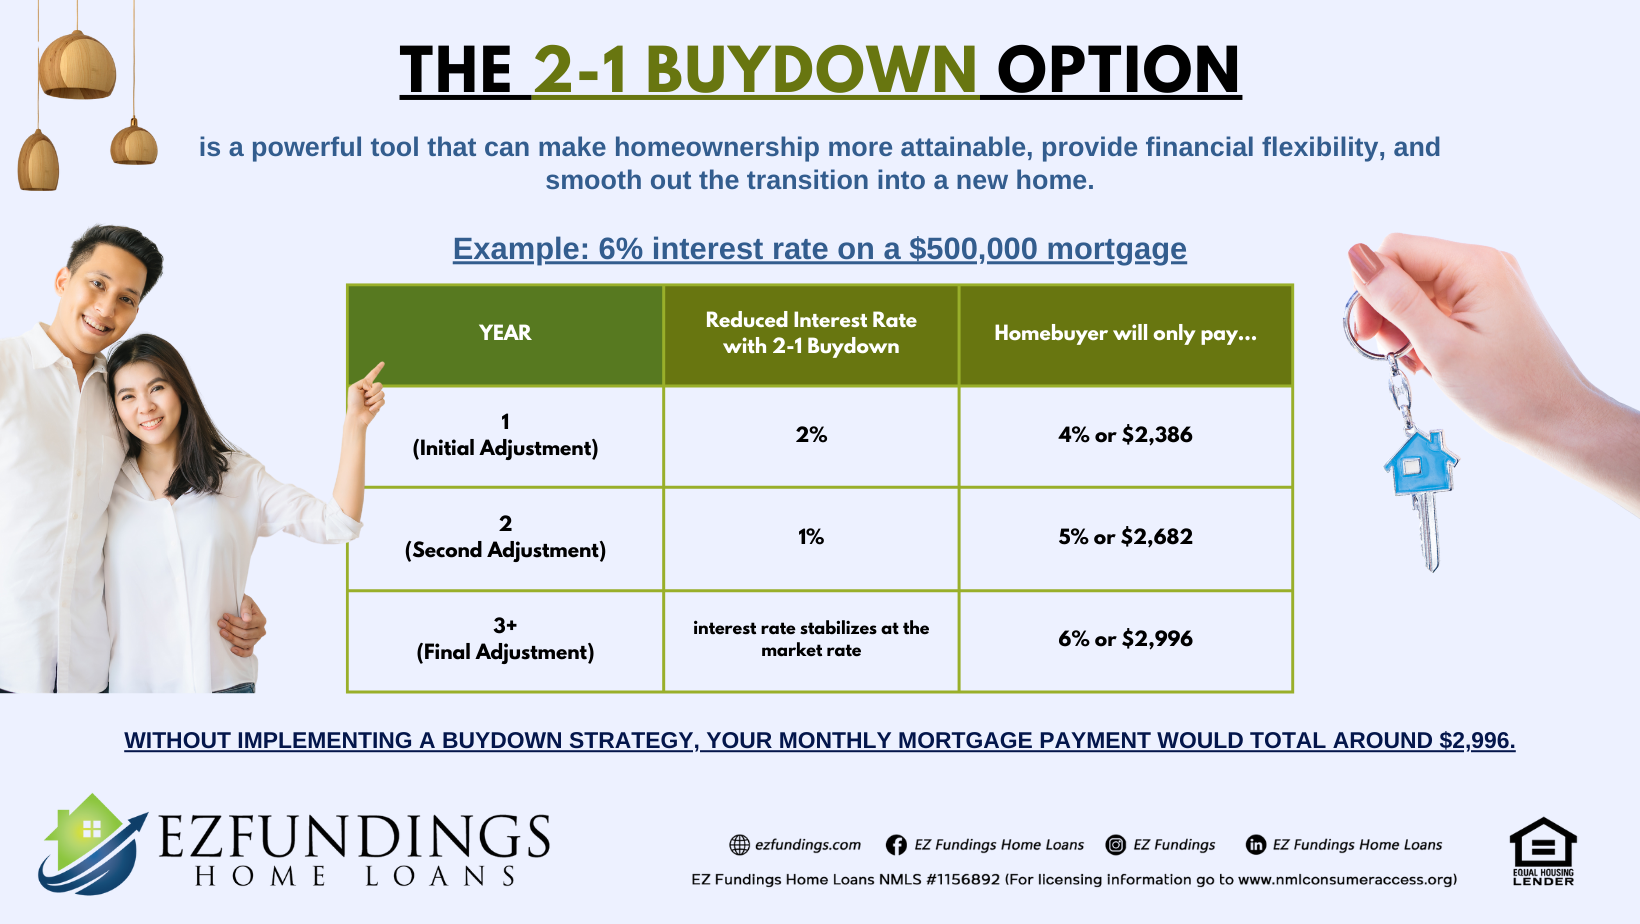 The article featured image shows 2-1 Buydown Option Example with a table also showing an example scenario with a 6% interest rate on a $500,000 mortgage. On year 1 or initial adjustment, homebuyer will only pay 4% out of 6% or just around $2,386. On Second Adjustment or year 2, the homebuyer pays at 5% or $2,682, and on the final adjustment or year until the end of loan term, the homebuyer pays the interest rate stabilized at the market rate or 6% or $2,996. The 2-1 Buydown is a powerful tool that can make homeownership more attainable, provide financial flexibility, and smooth out the transition into a new home.